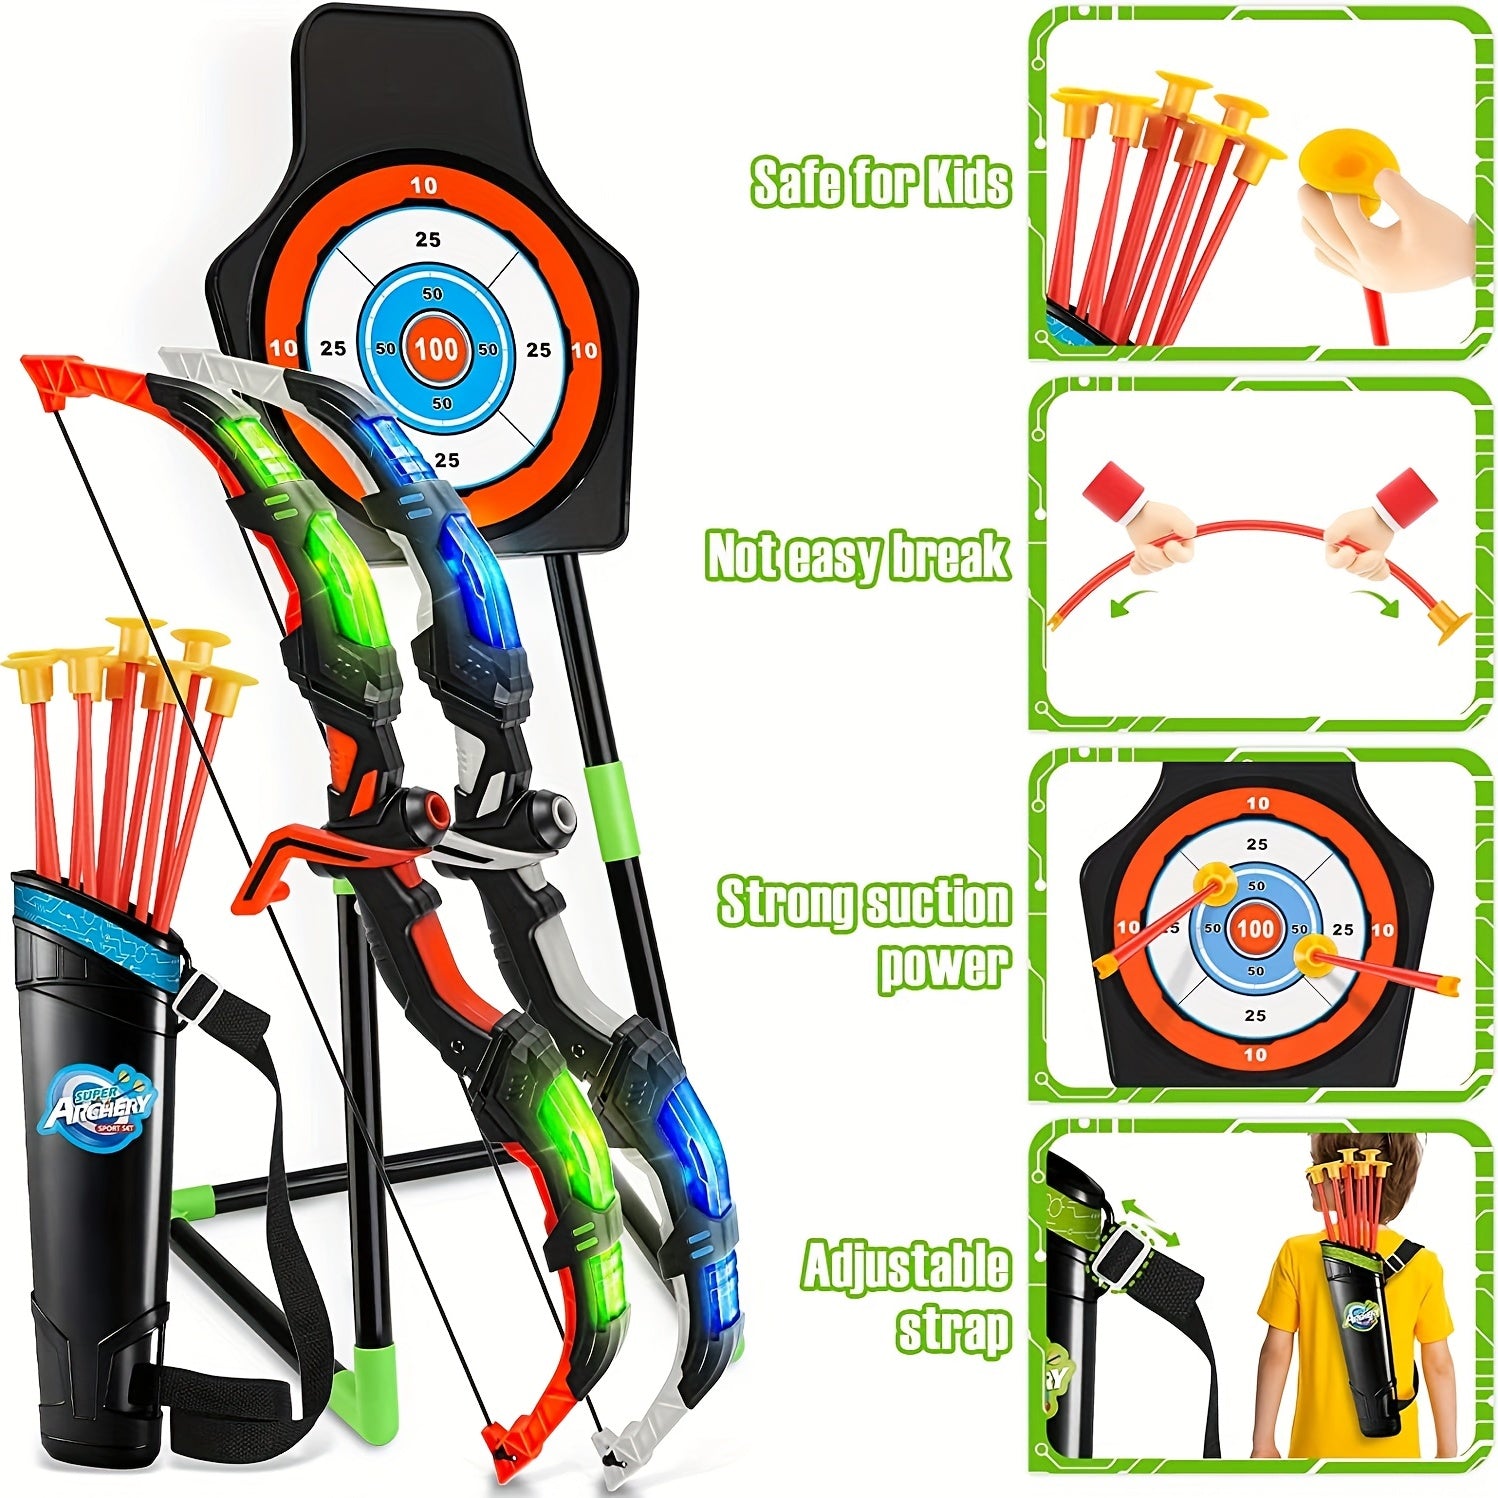 Kids Bow And Arrow Toy Set For Kids 4-6-8-12 Years Old, Archery Toy Set With LED Light - Includes 2 Bows, 20 Suction Cup Arrows, 2 Arrows And 1 Vertical Target